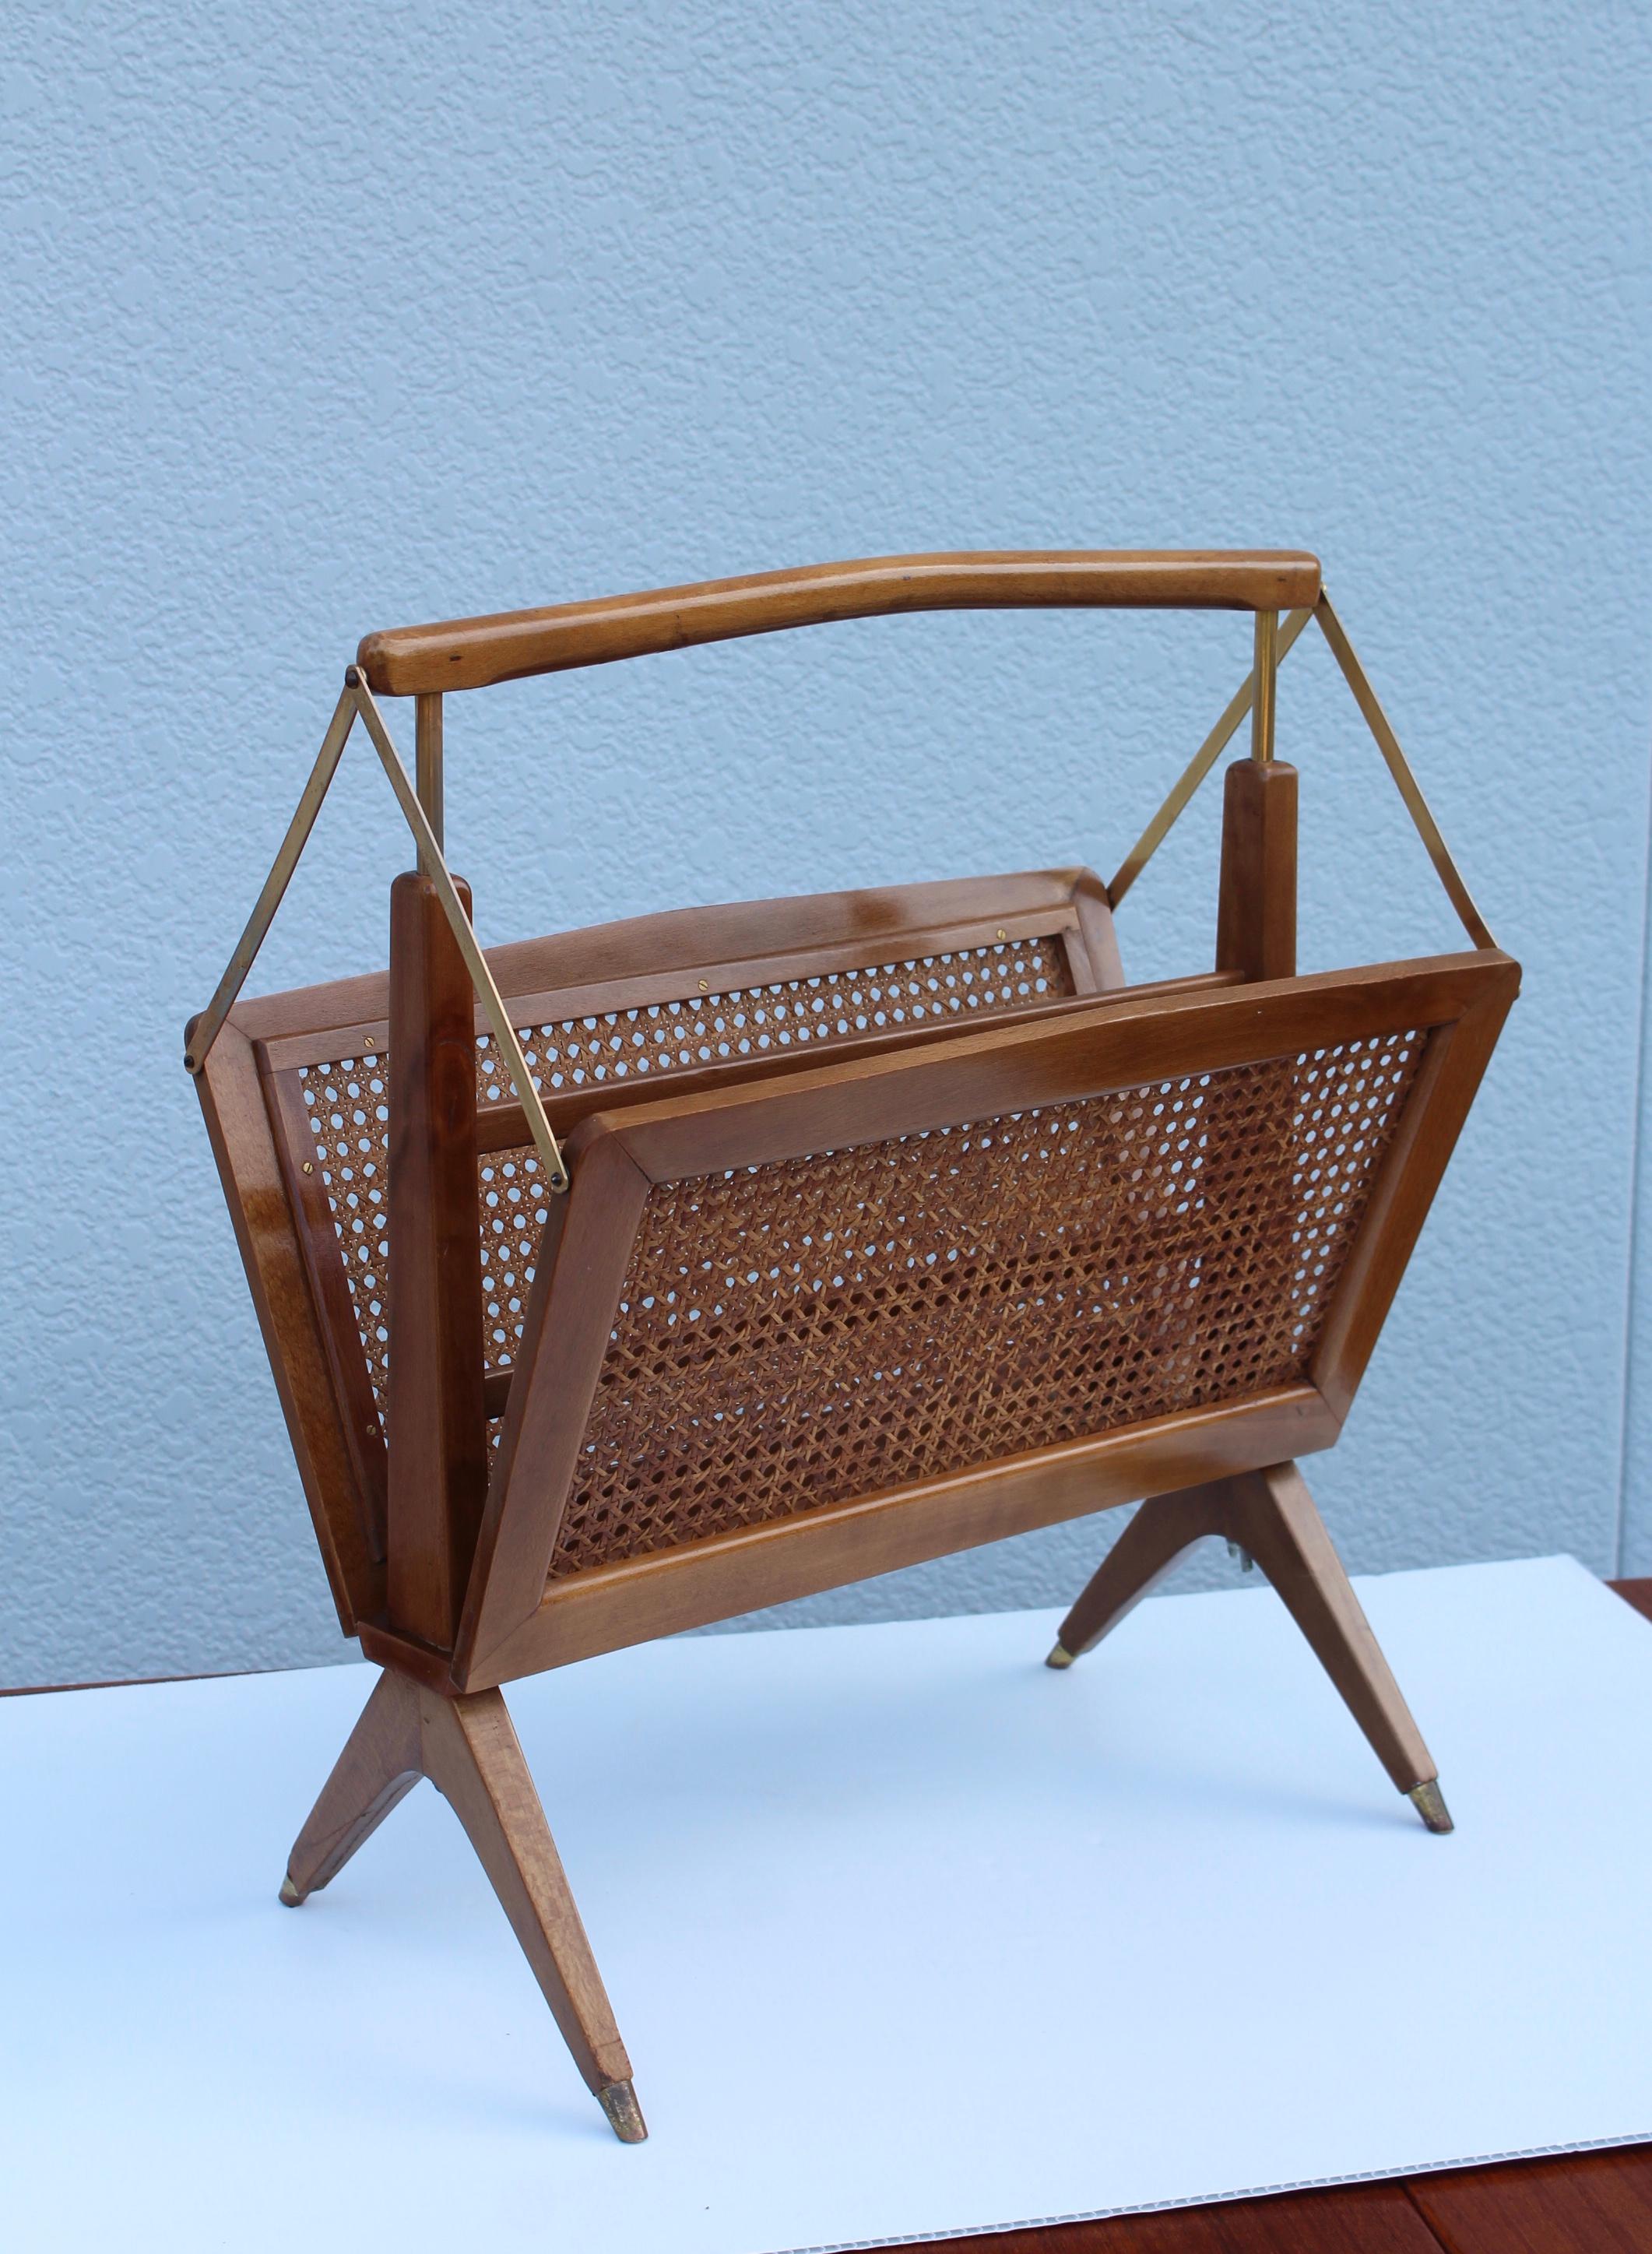 1960s modern folding Italian magazine holder by Cesare Lacca. made of walnut and rattan with brass hardware.